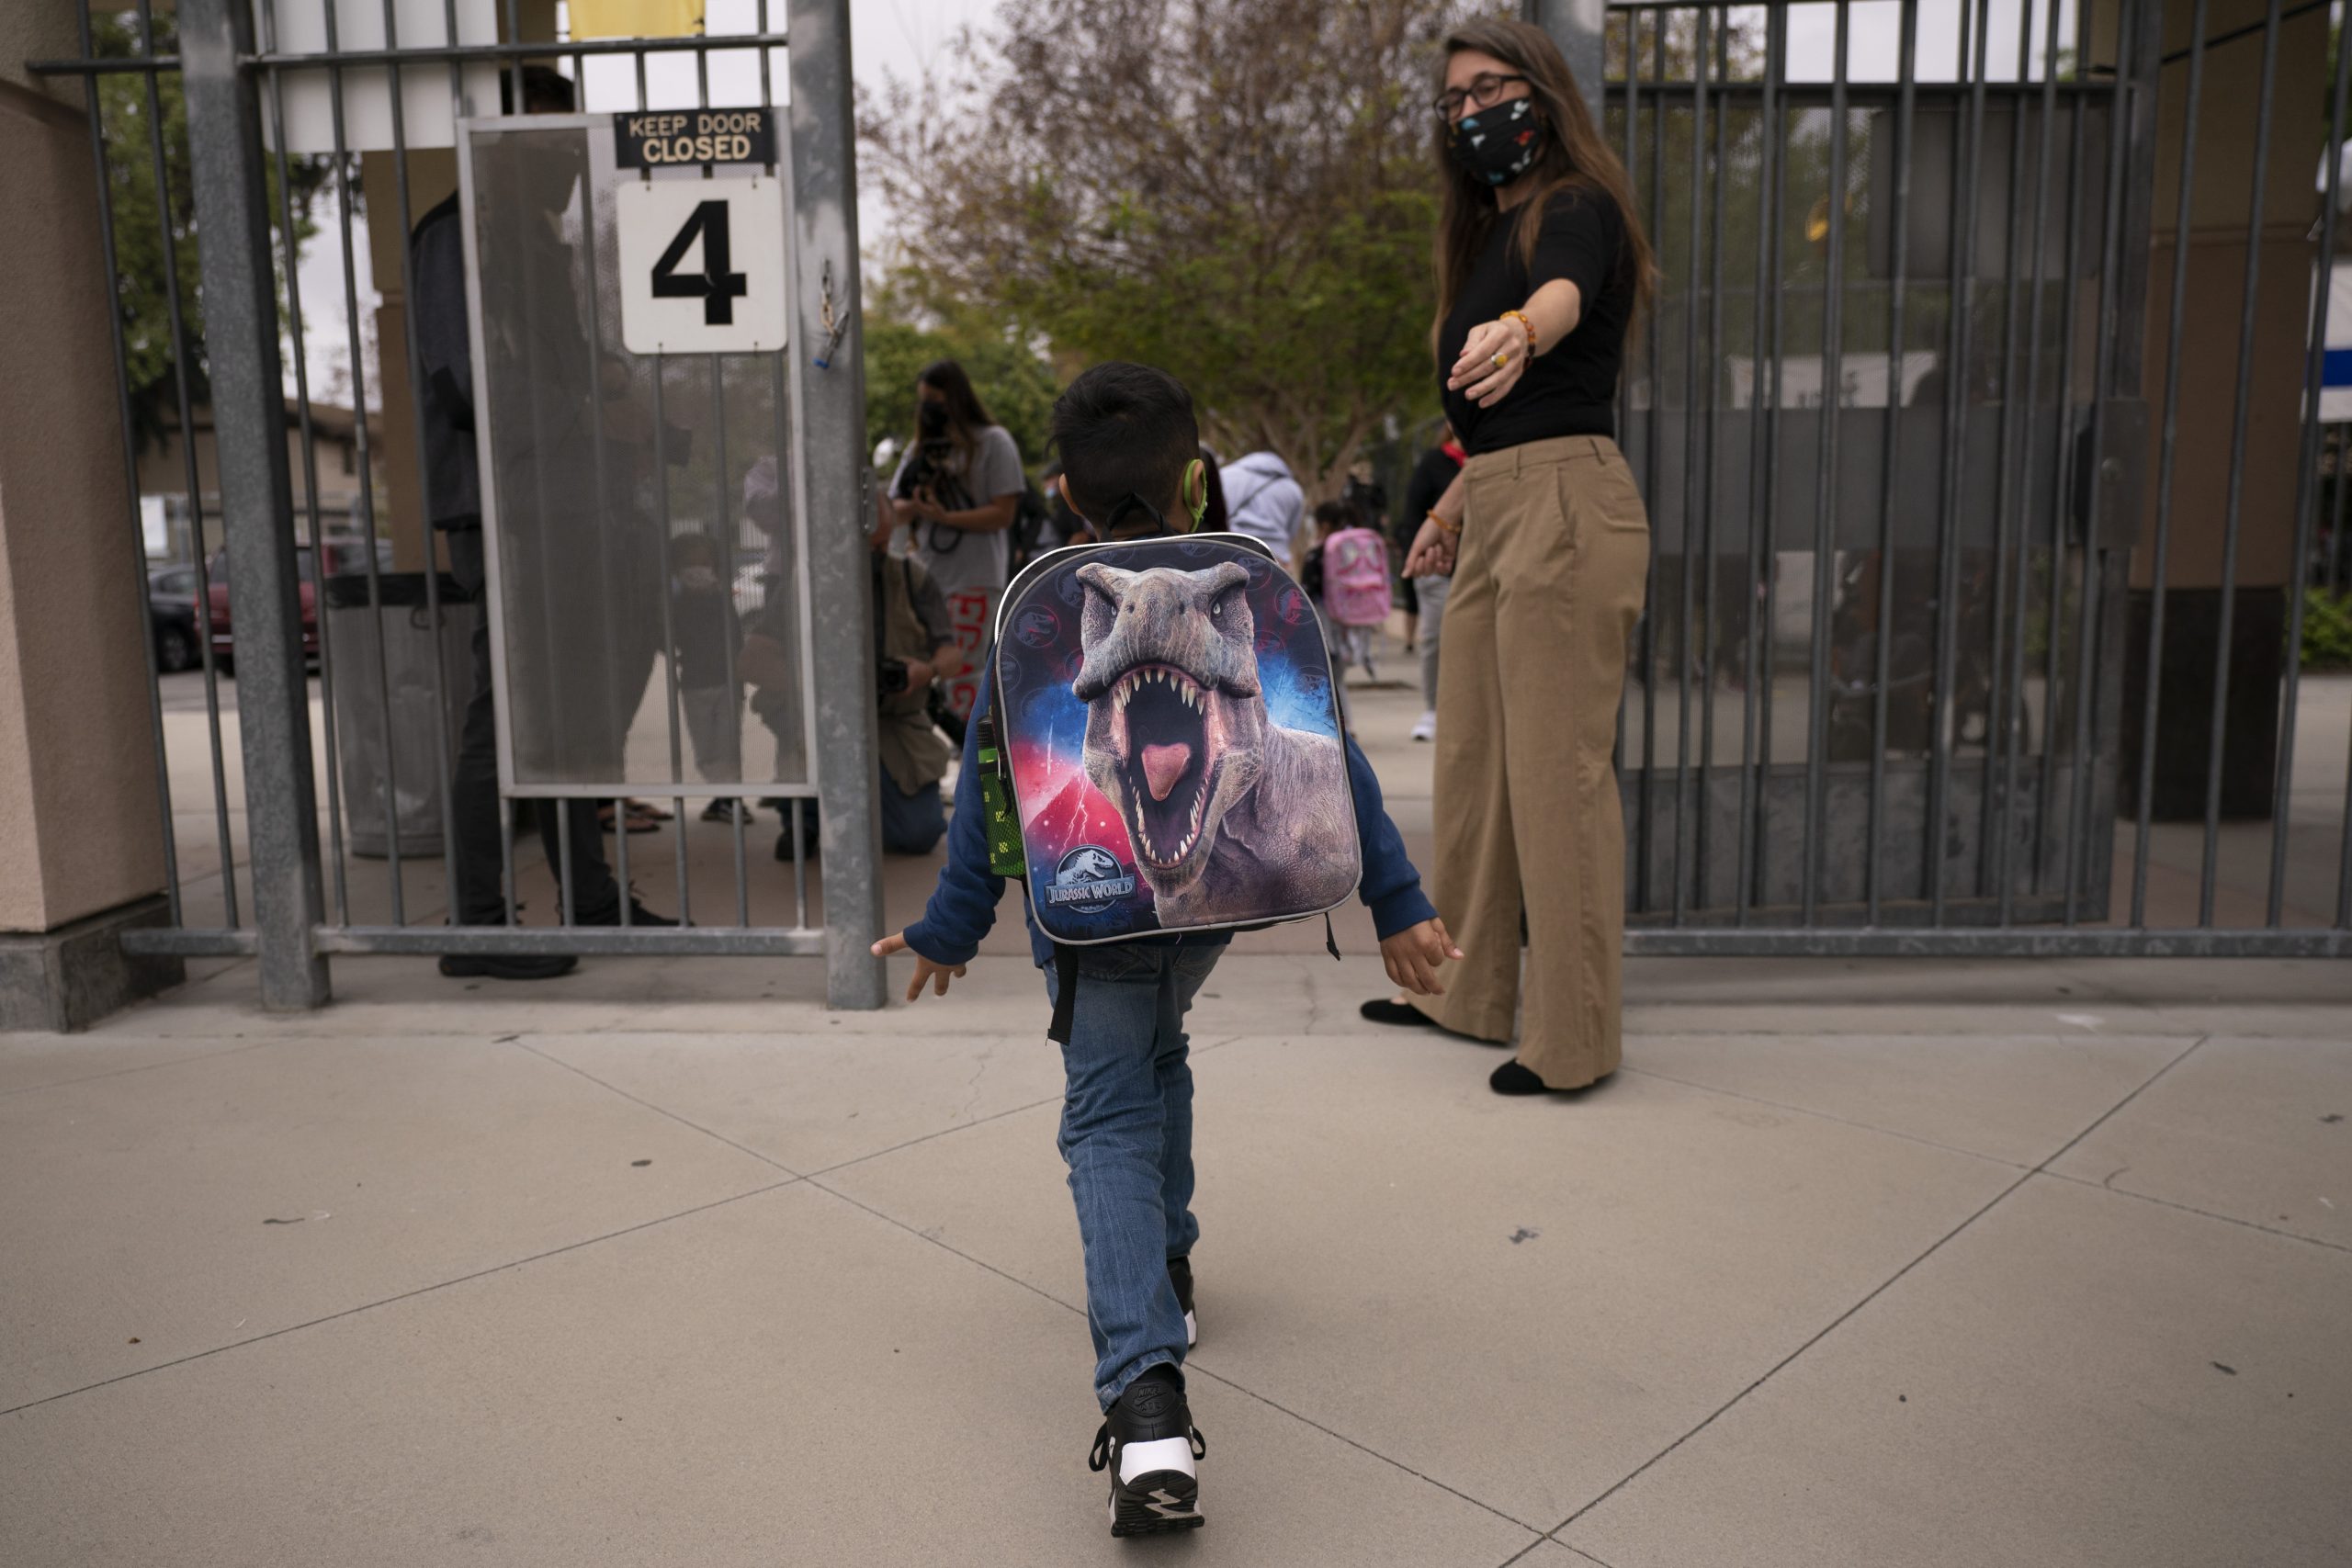 Kindergartener leaves after the first day of in-person learning at a School in Los Angeles, Tuesday, April 13, 2021. (AP Photo/Jae C. Hong)